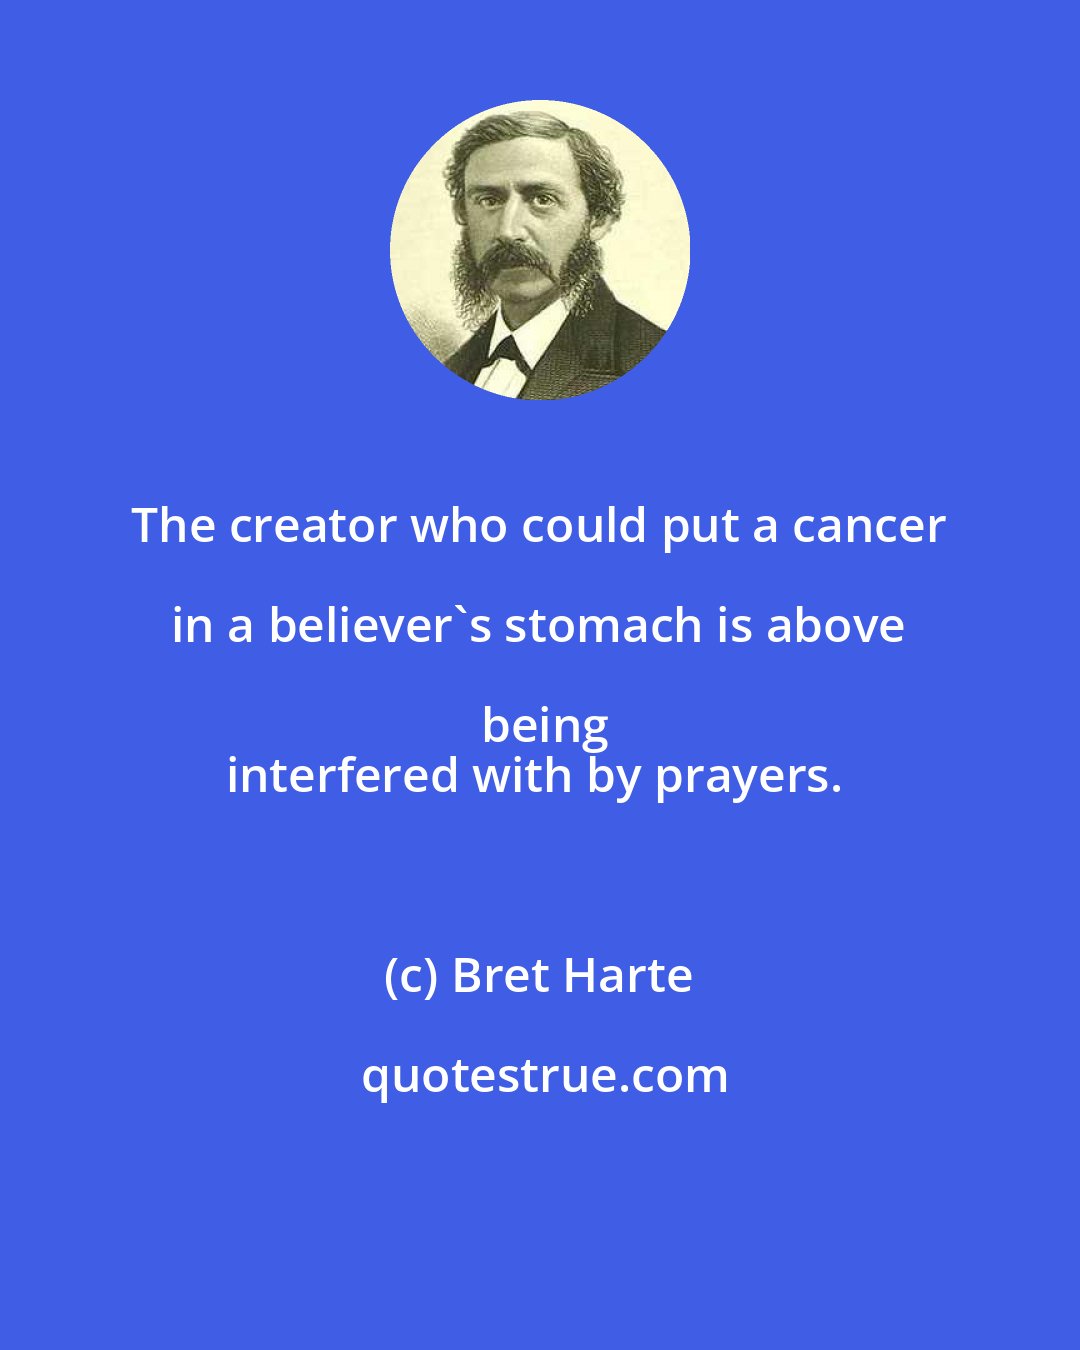 Bret Harte: The creator who could put a cancer in a believer's stomach is above being
interfered with by prayers.